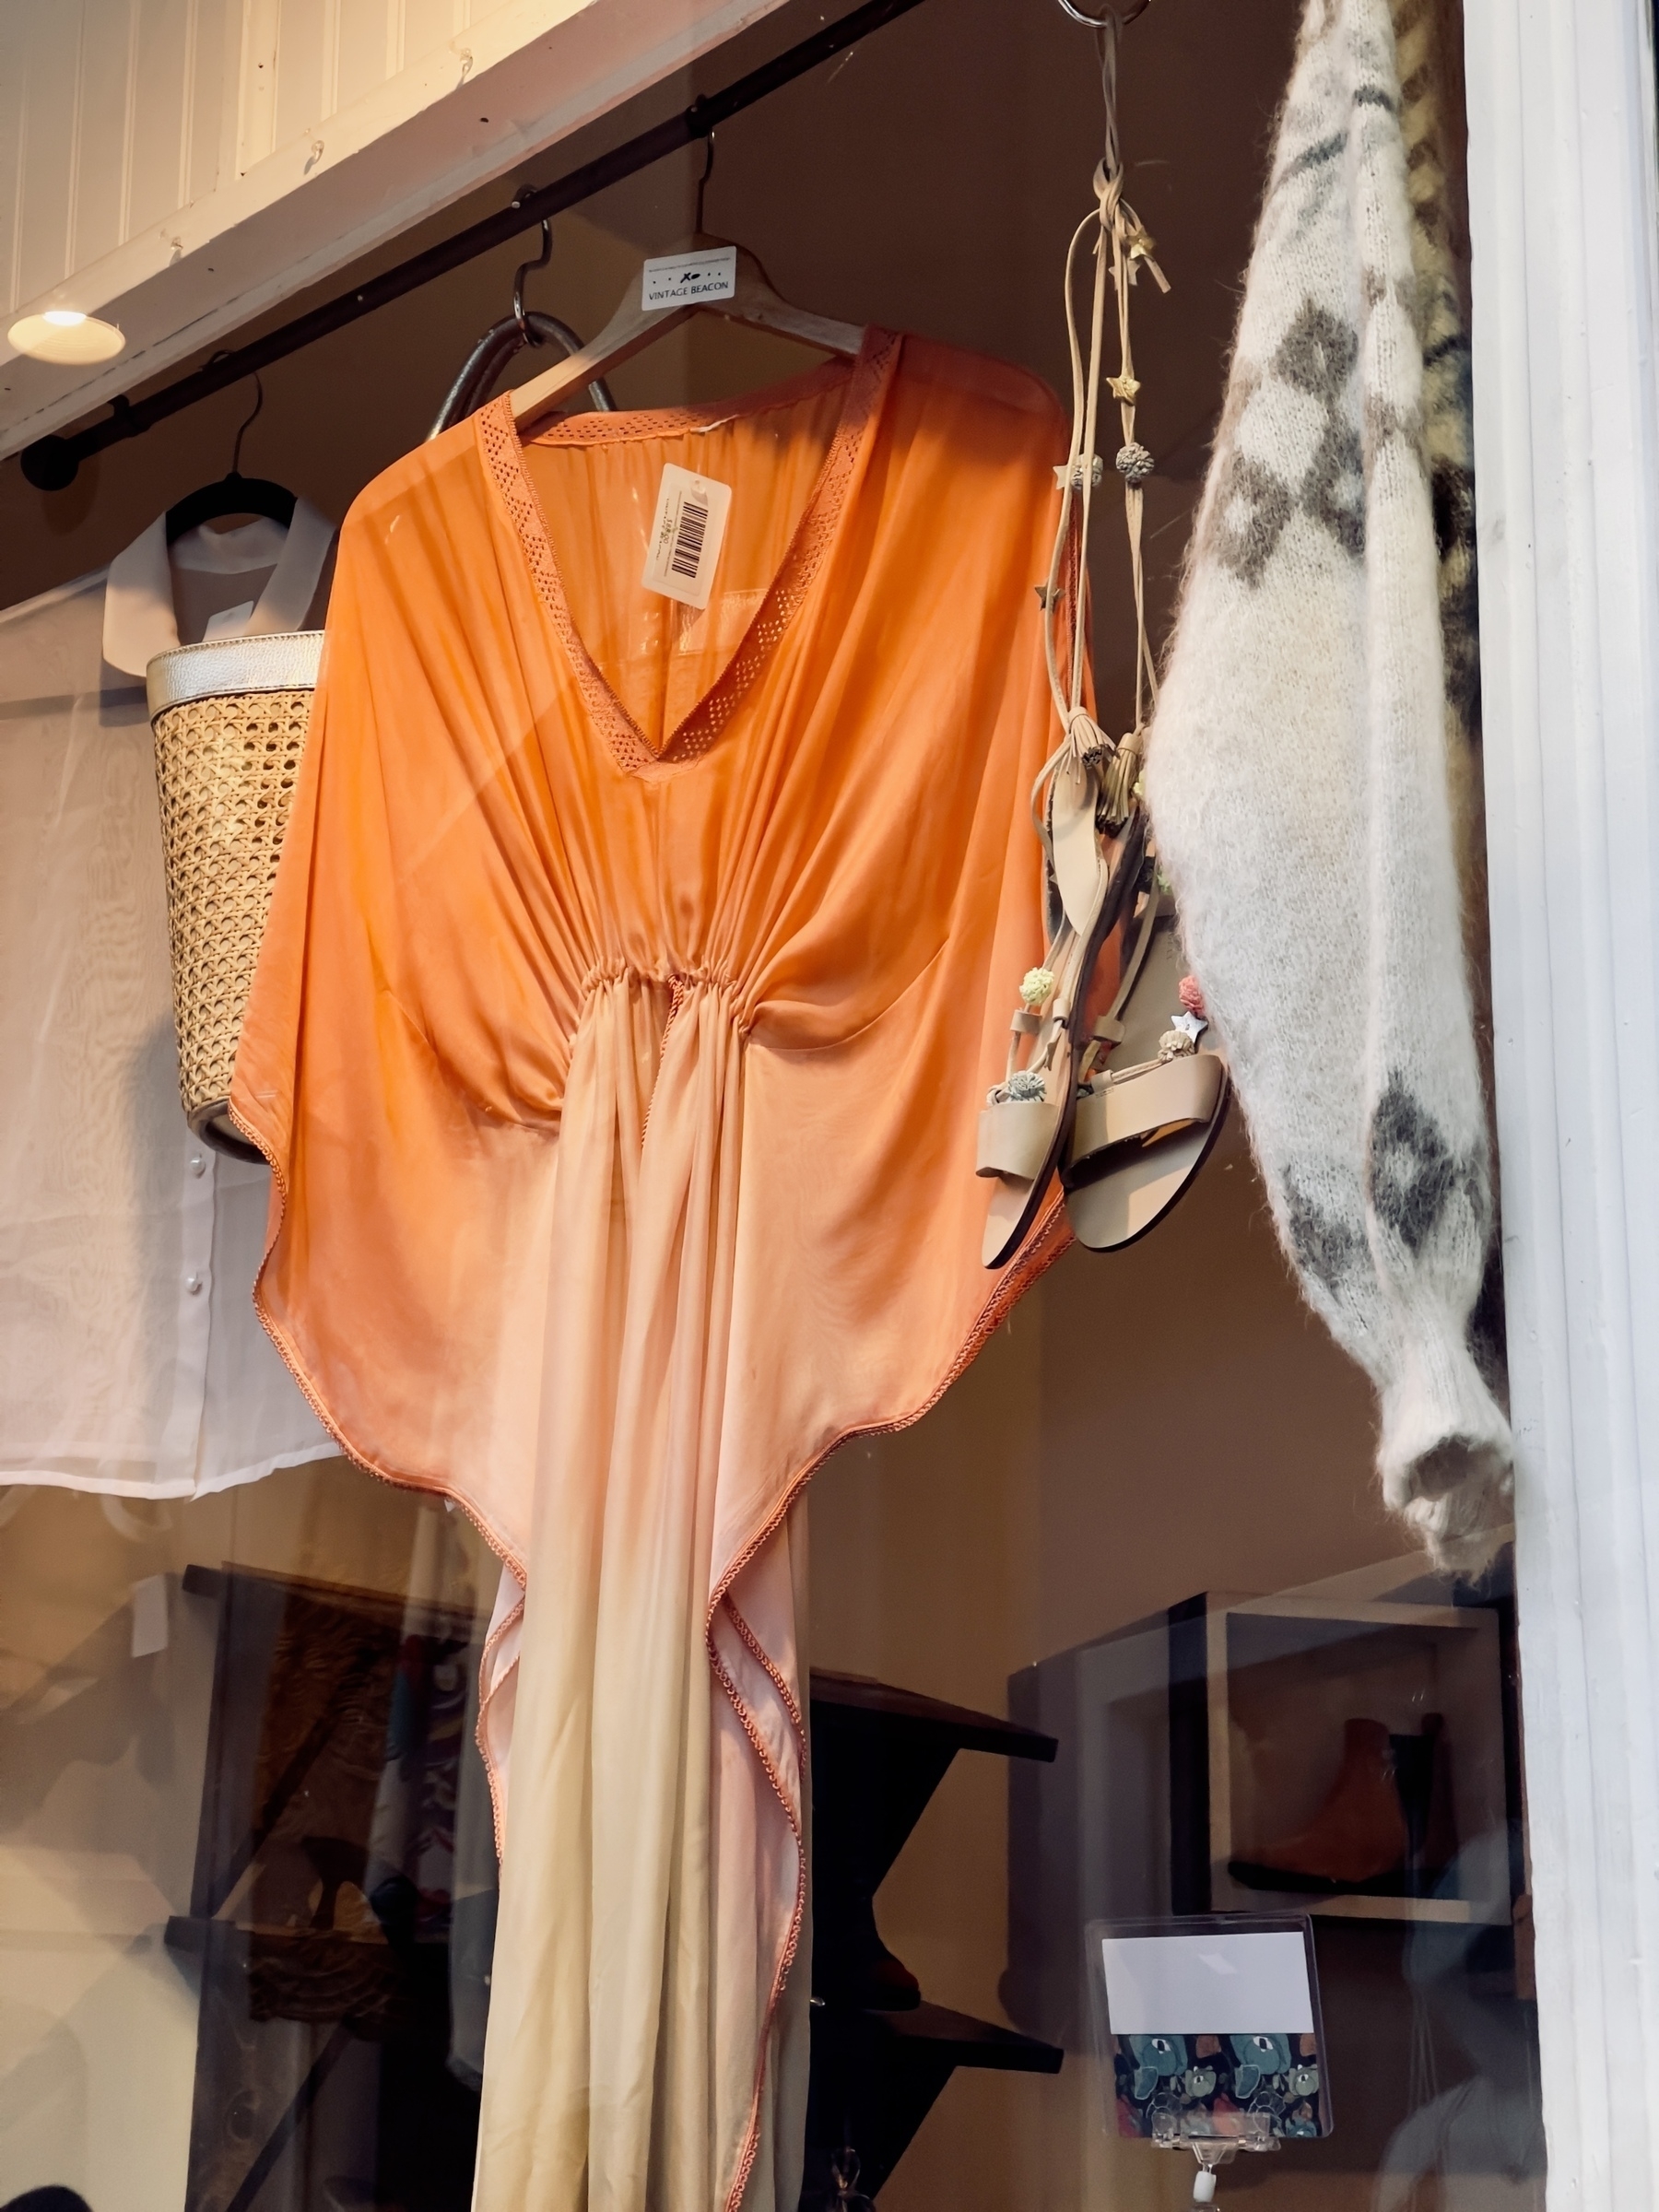 Silky orange evening dress, with gathered waist, hanging in a vintage clothing shop window.